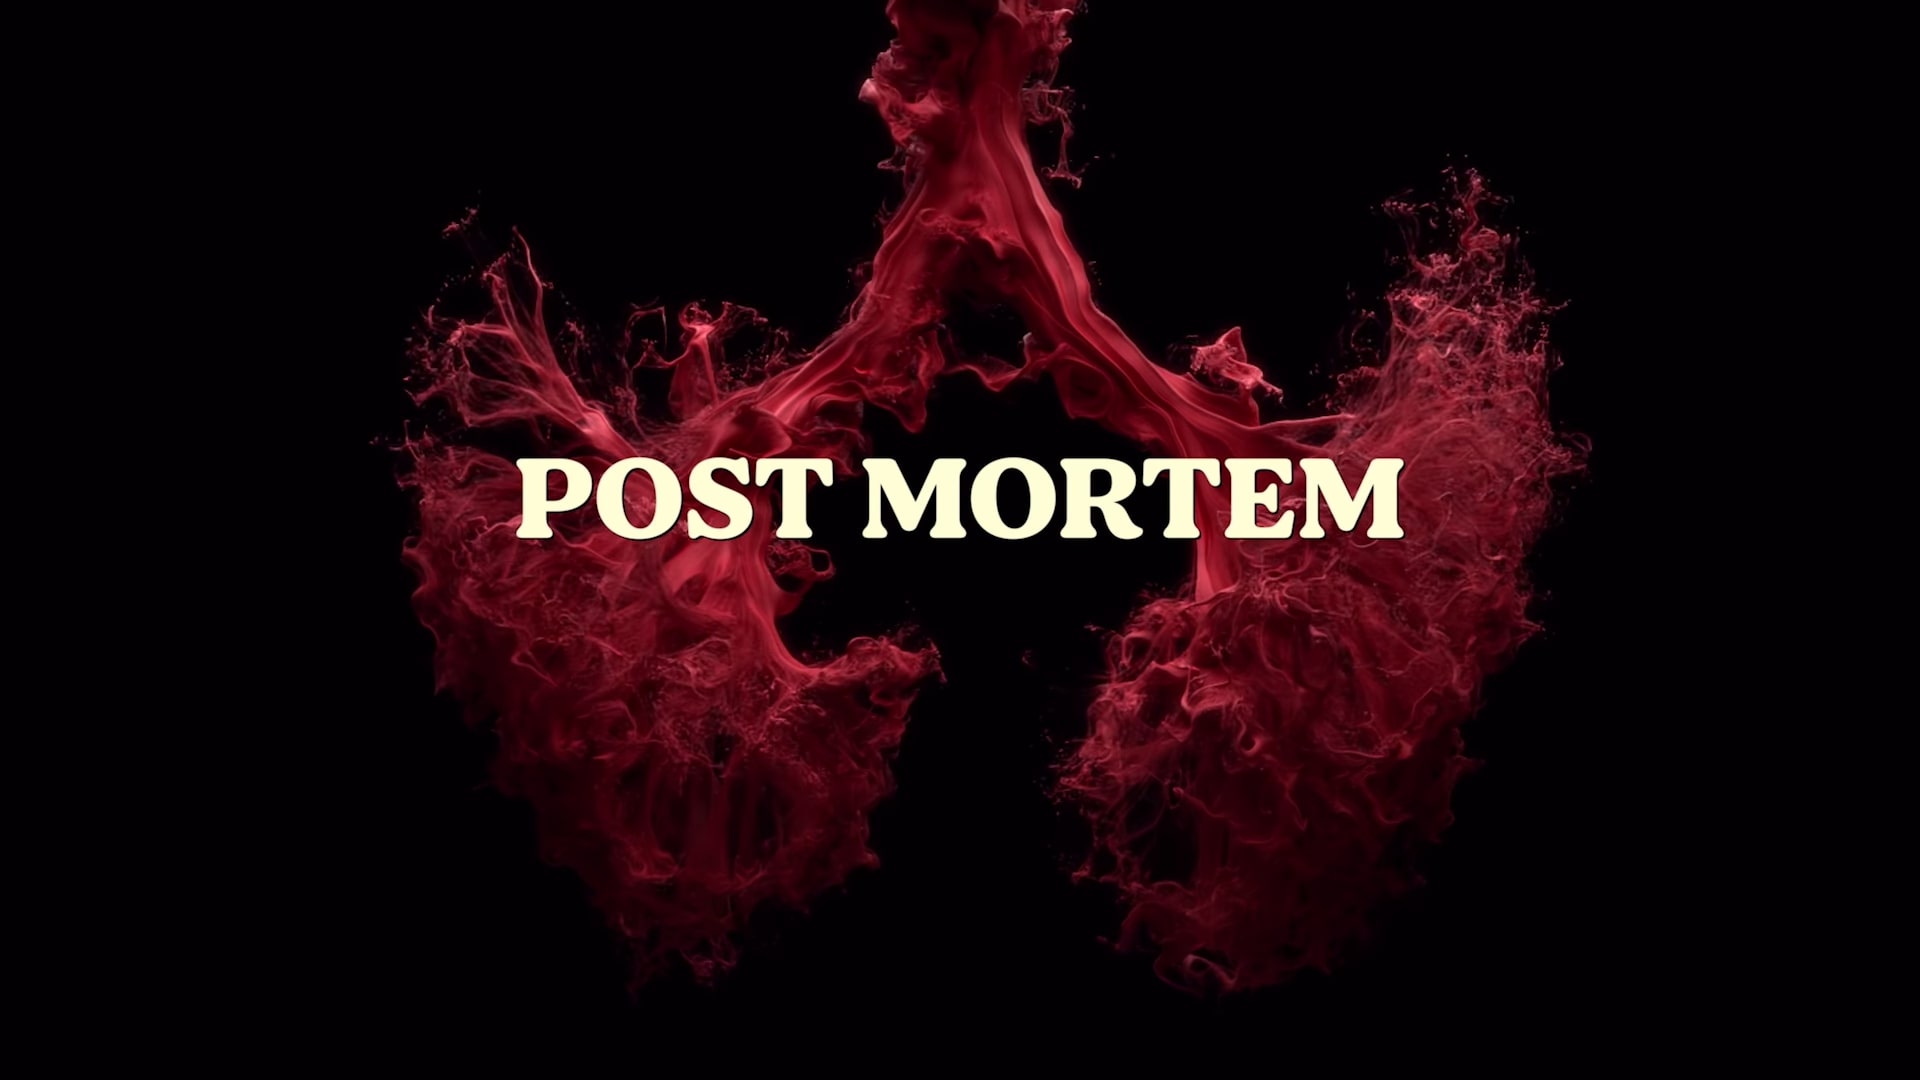 Netflix Post Mortem Official Trailer, Coming to Netflix in August 2021